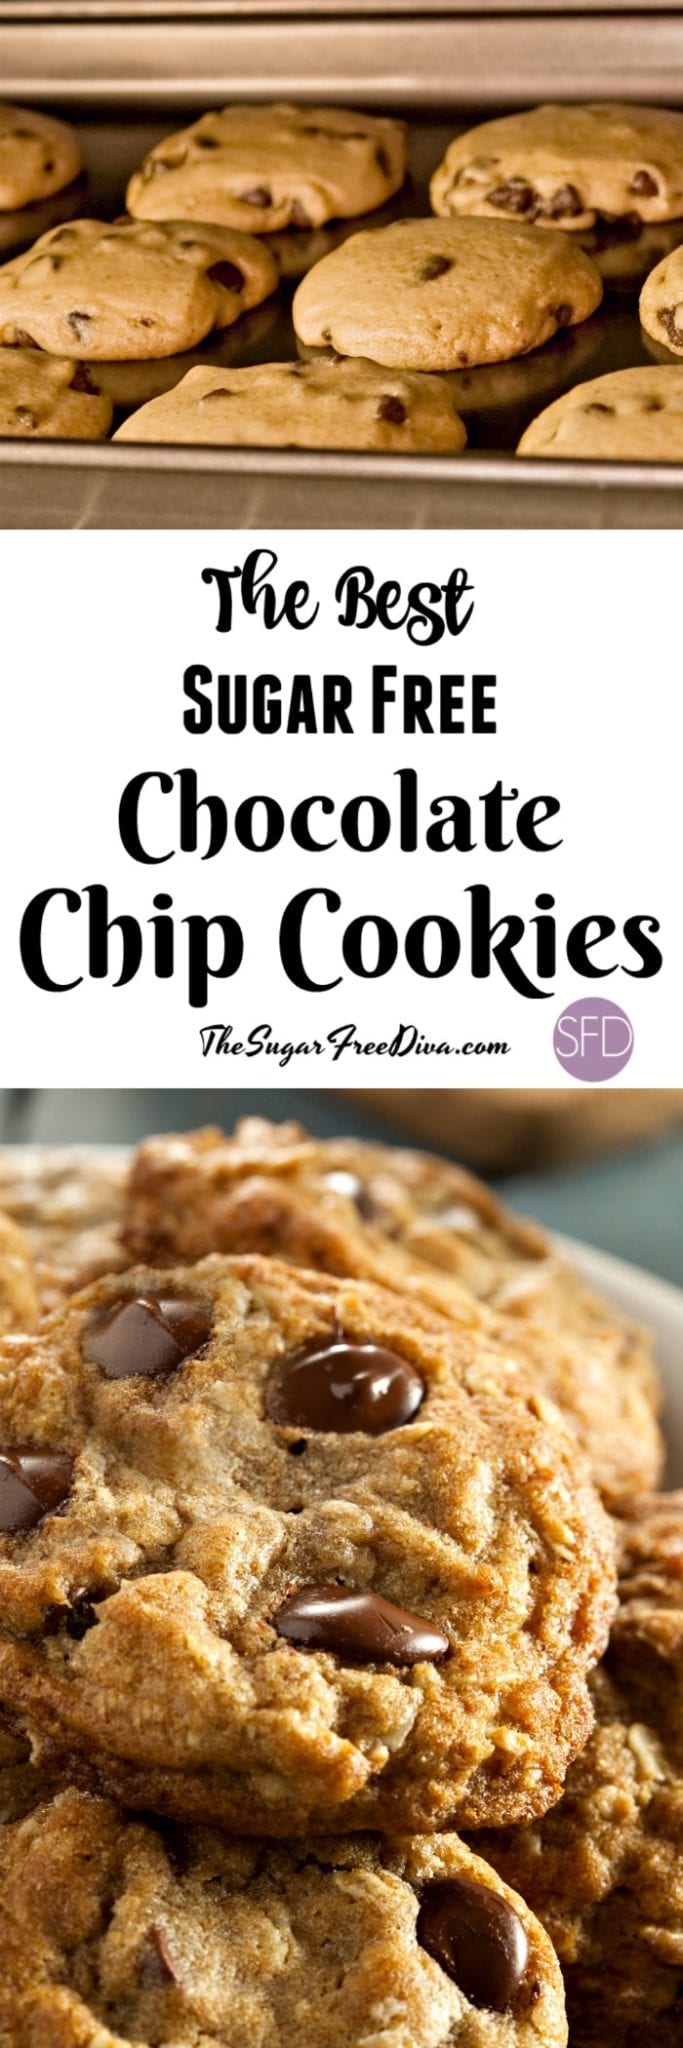 This is the recipe for The Best Sugar Free Chocolate Chip Cookies